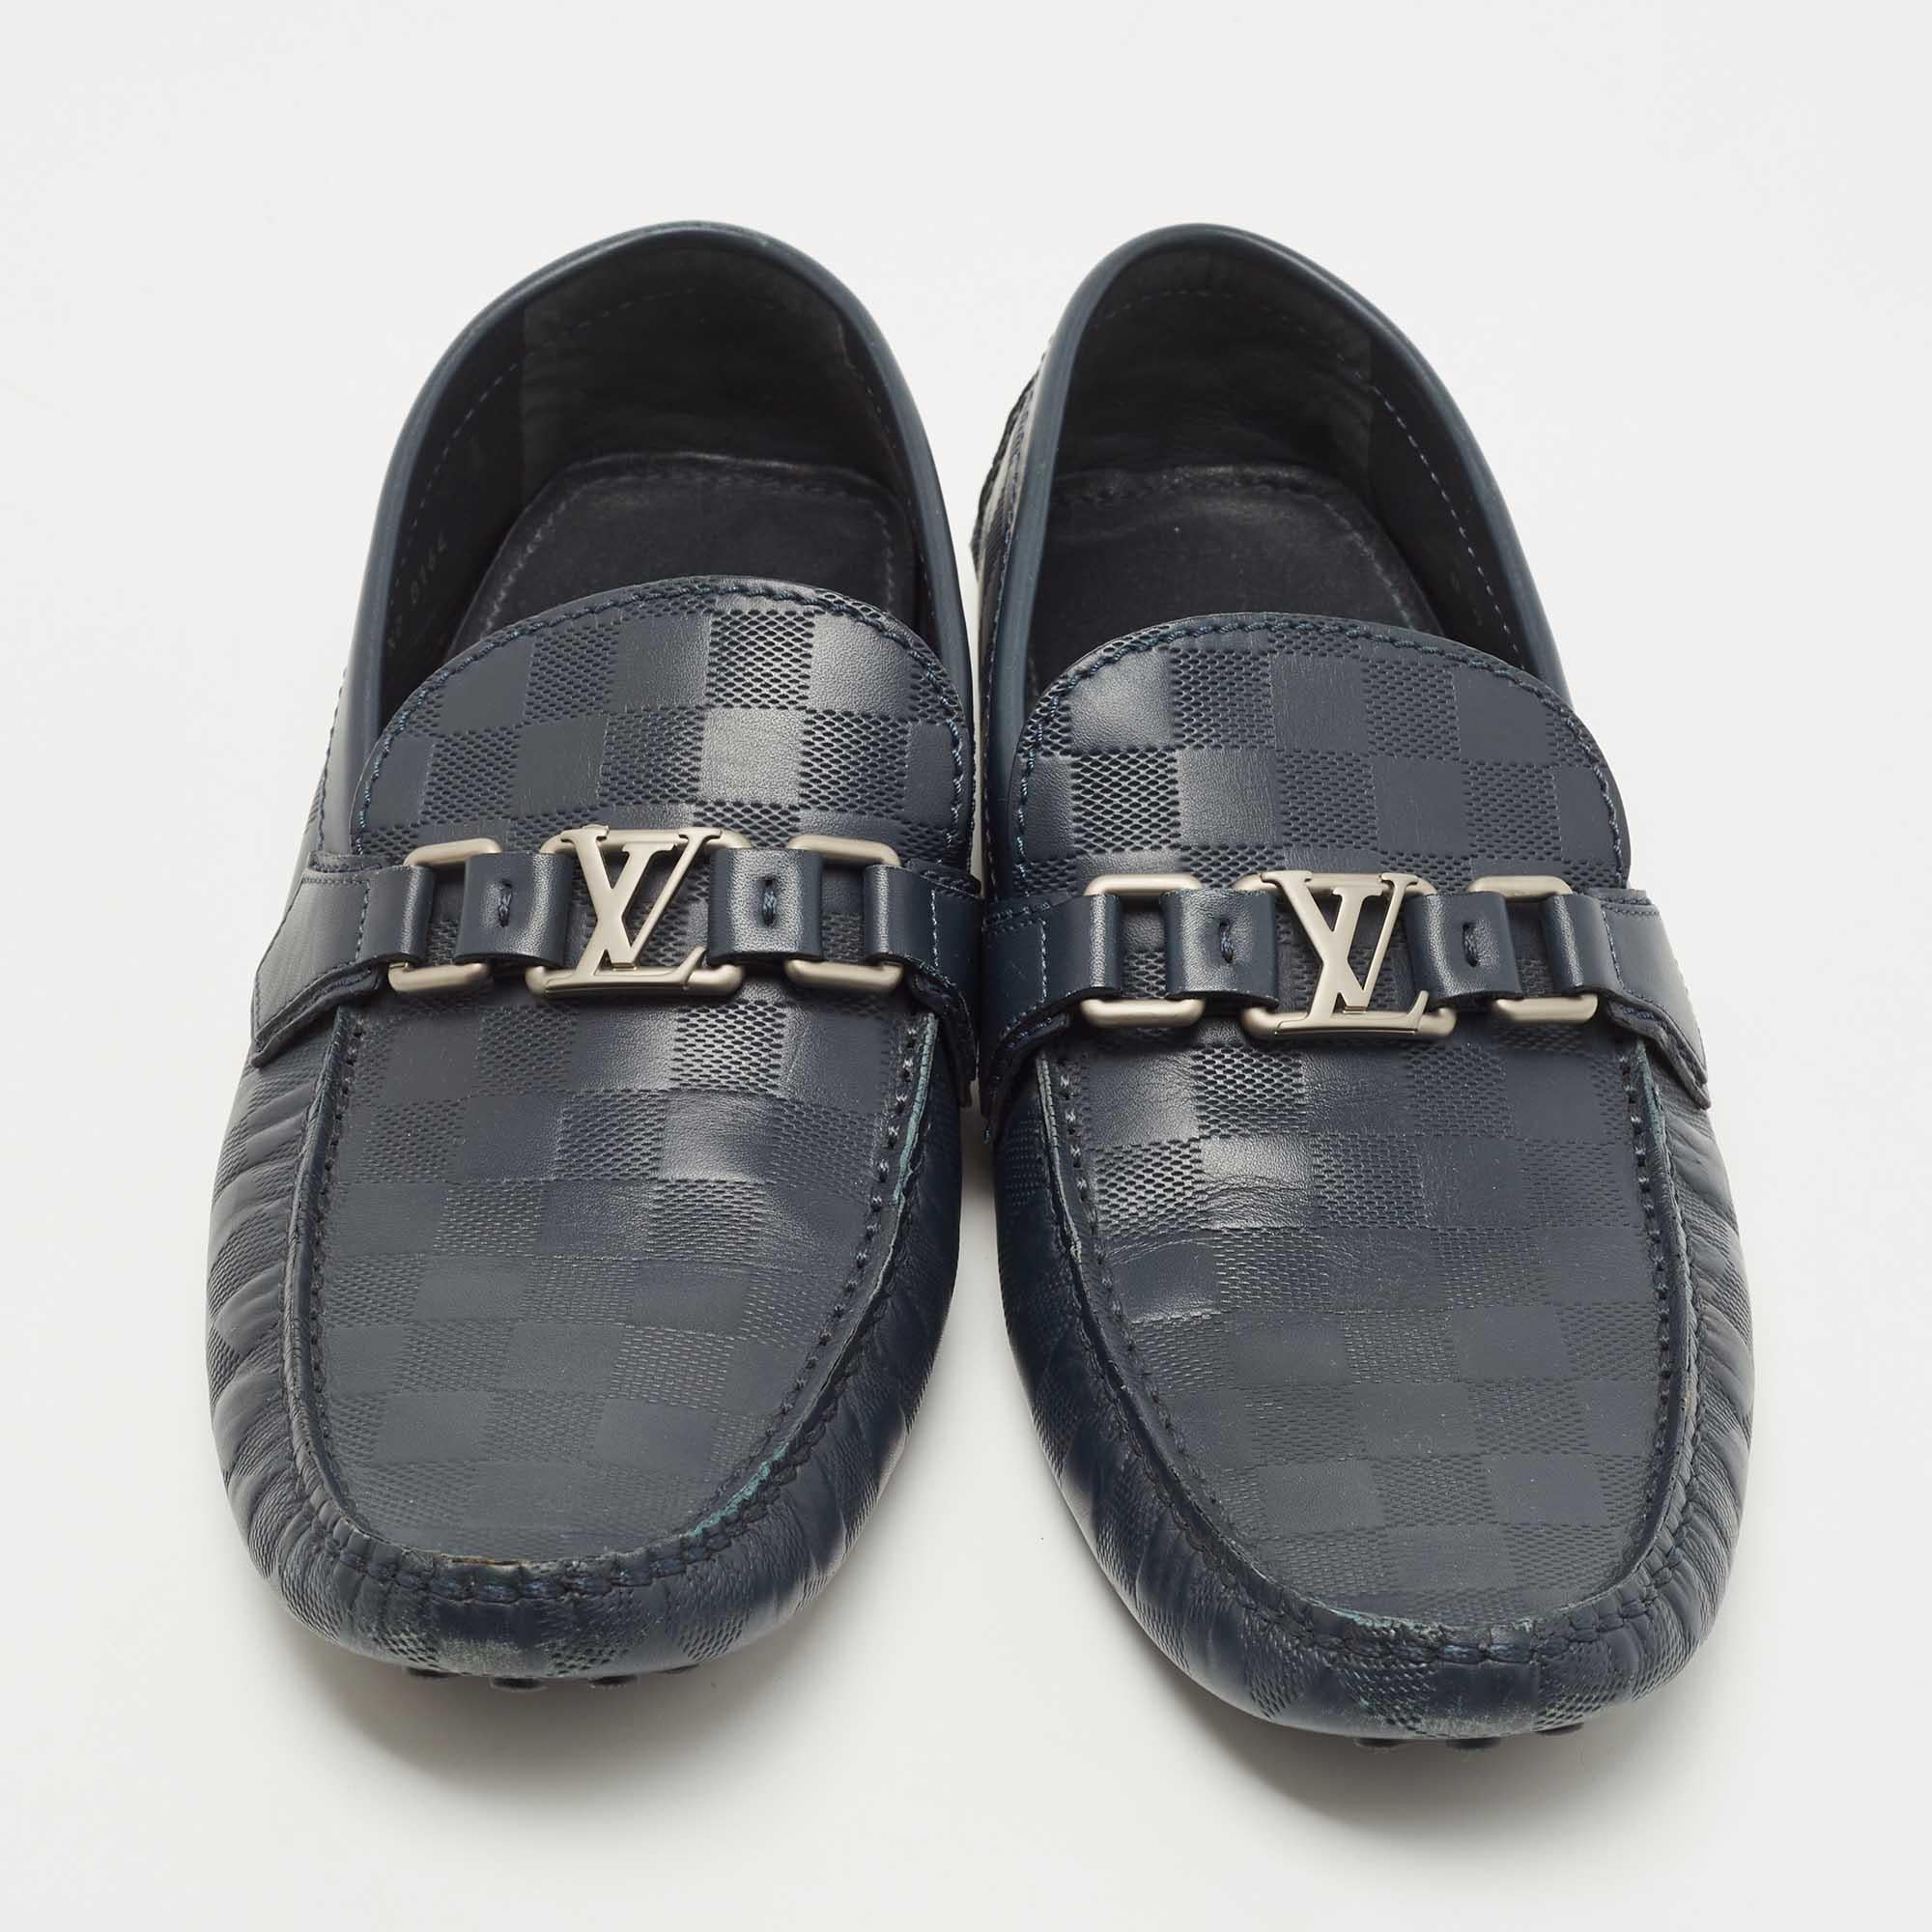 Let this comfortable pair be your first choice when you're out for a long day. These LV shoes have well-sewn uppers beautifully set on durable soles.

